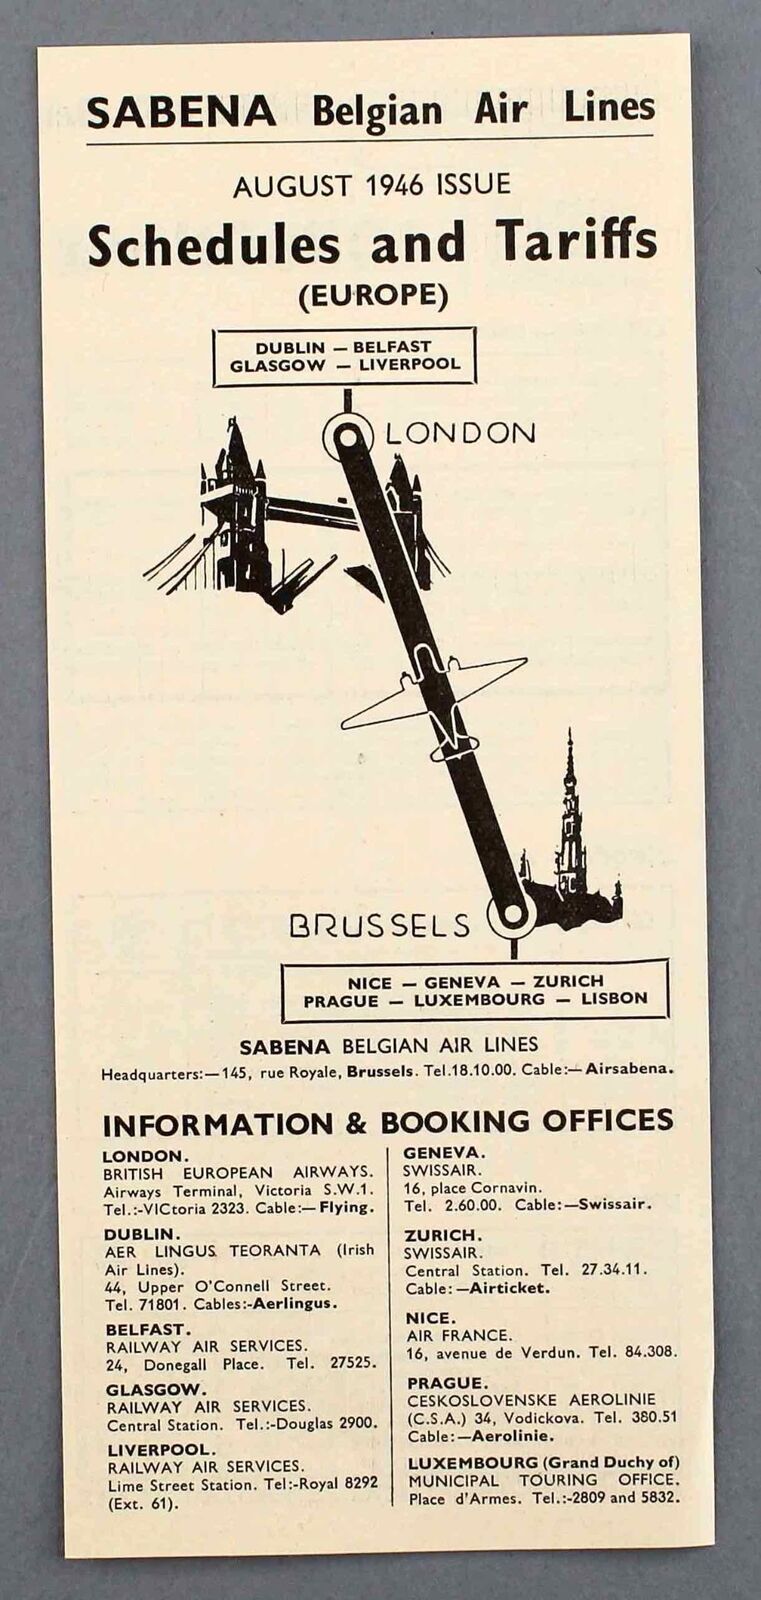 SABENA AIRLINE TIMETABLE LONDON AUGUST 1946 BELGIAN AIRLINES